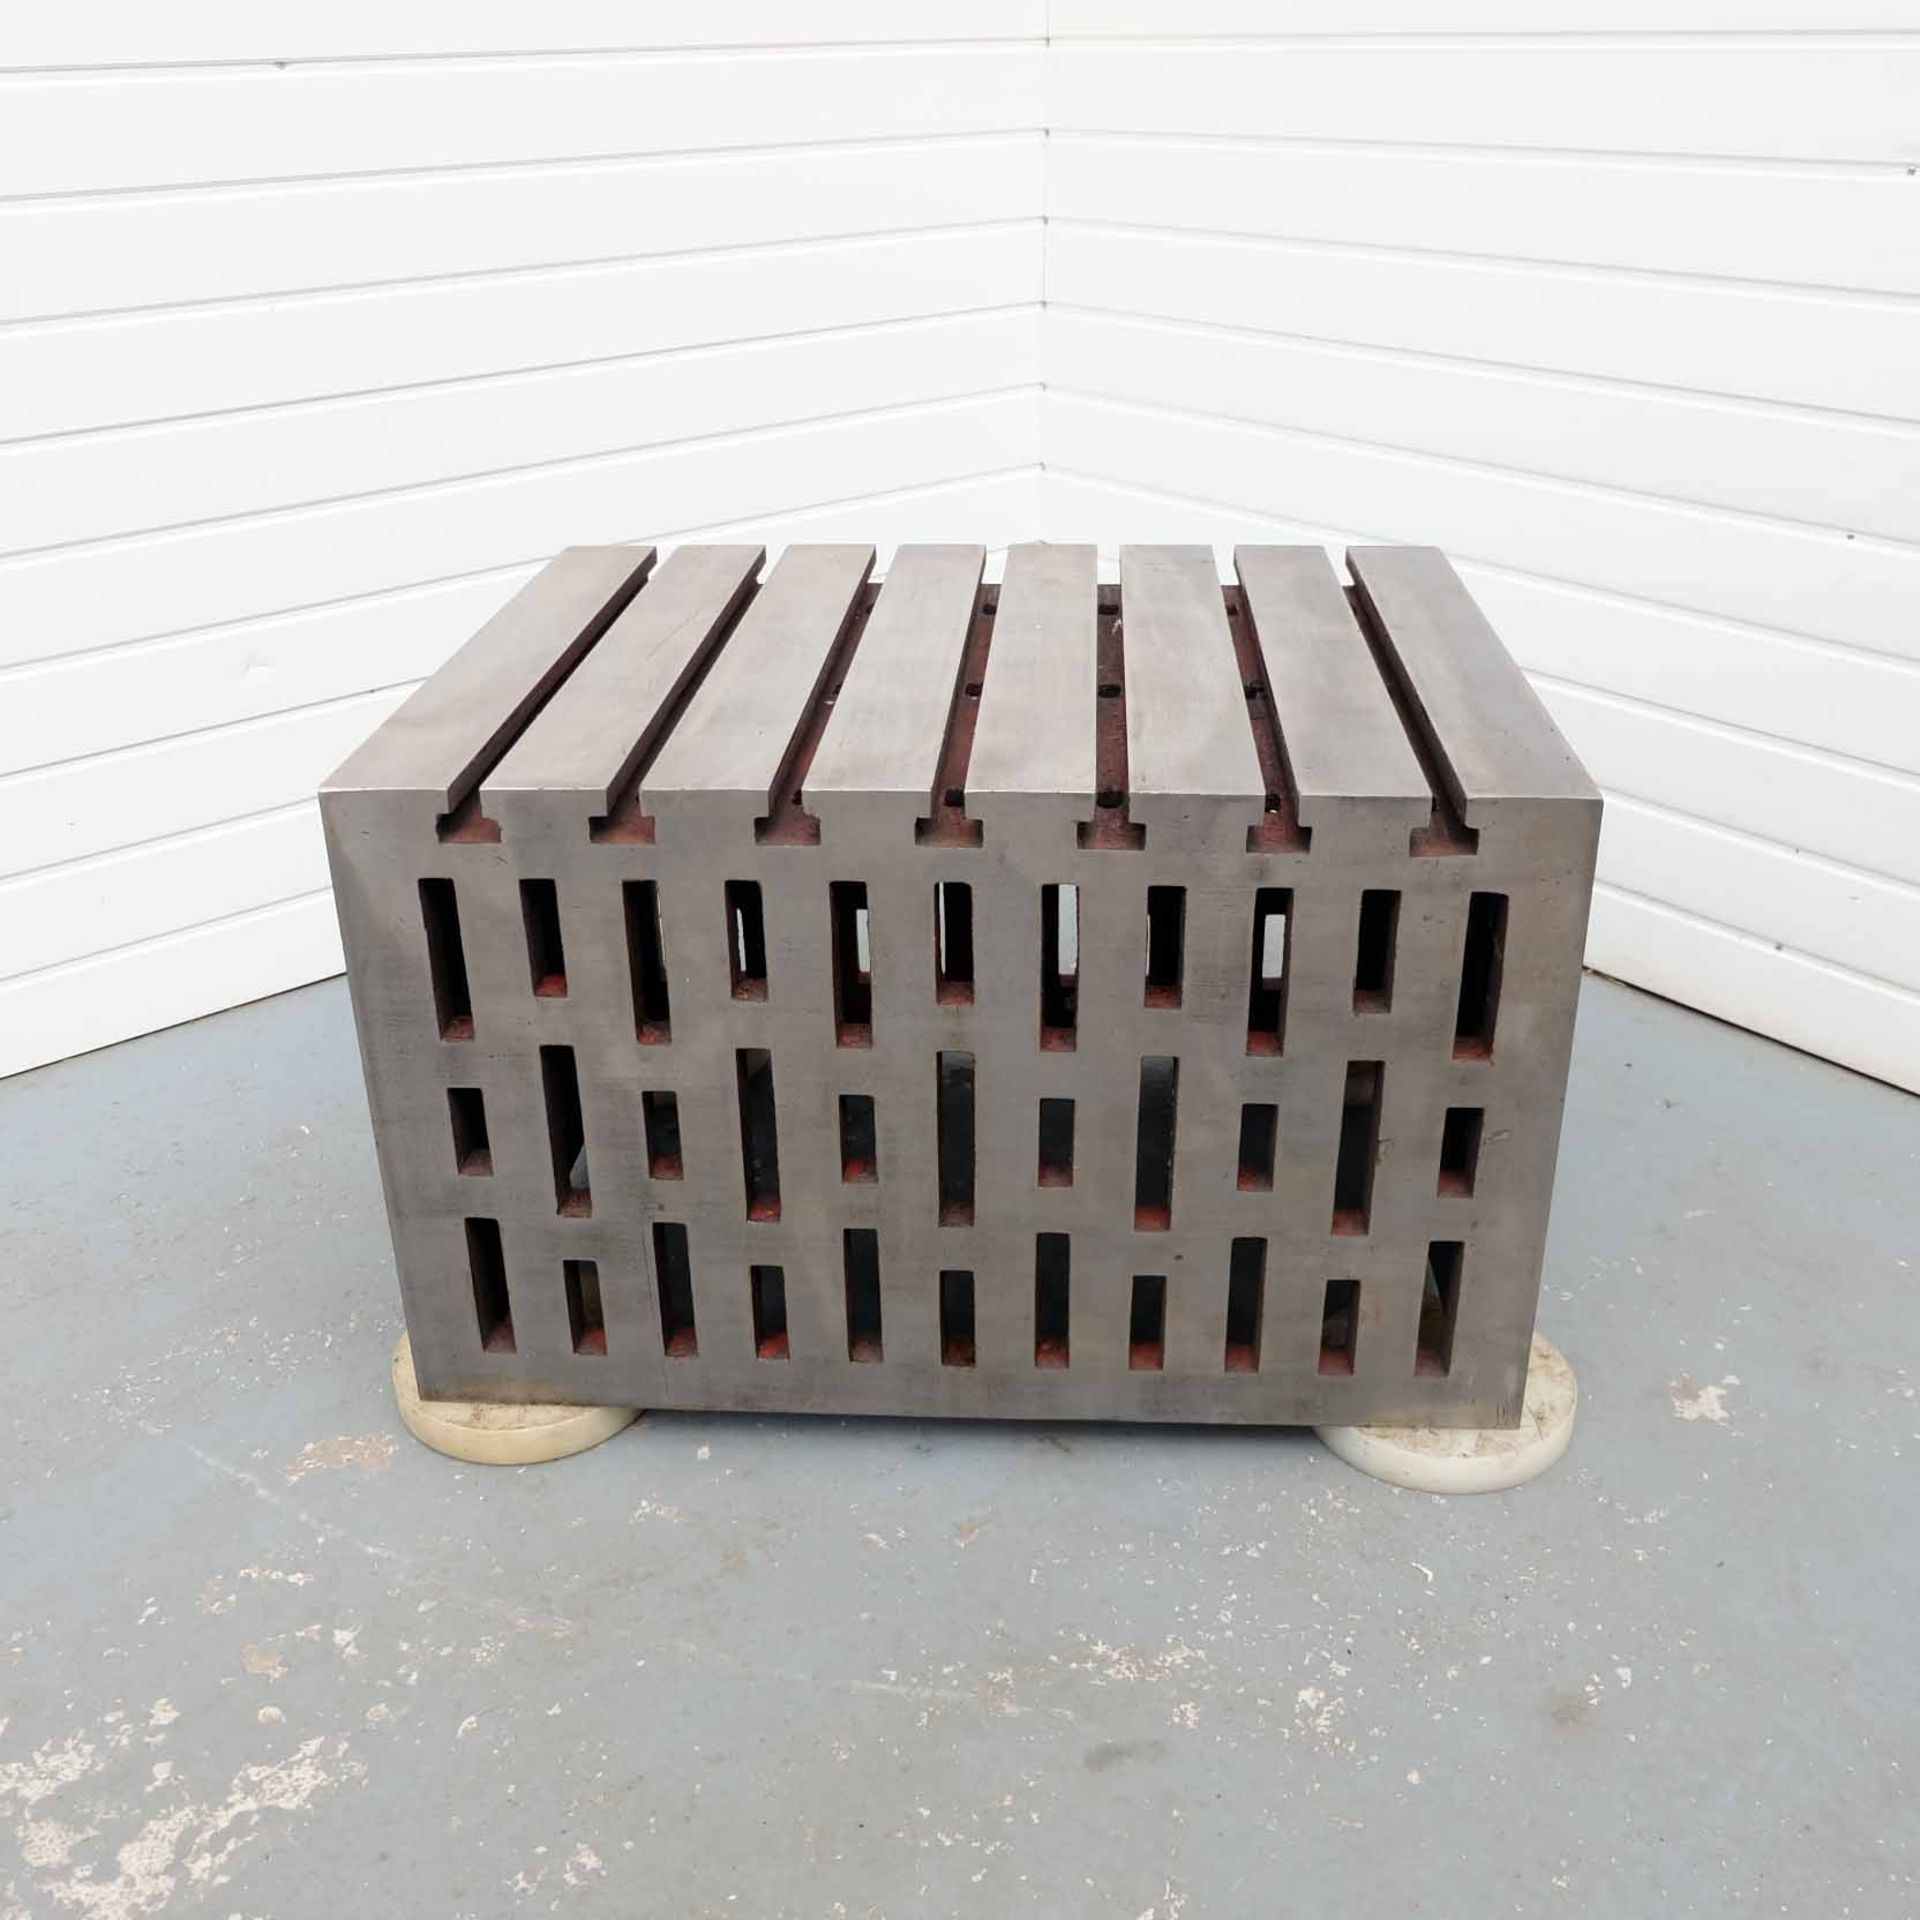 Tee Slotted Cube. Size 30" x 24" x 18". Tee Slotted on 30" x 24" Side.